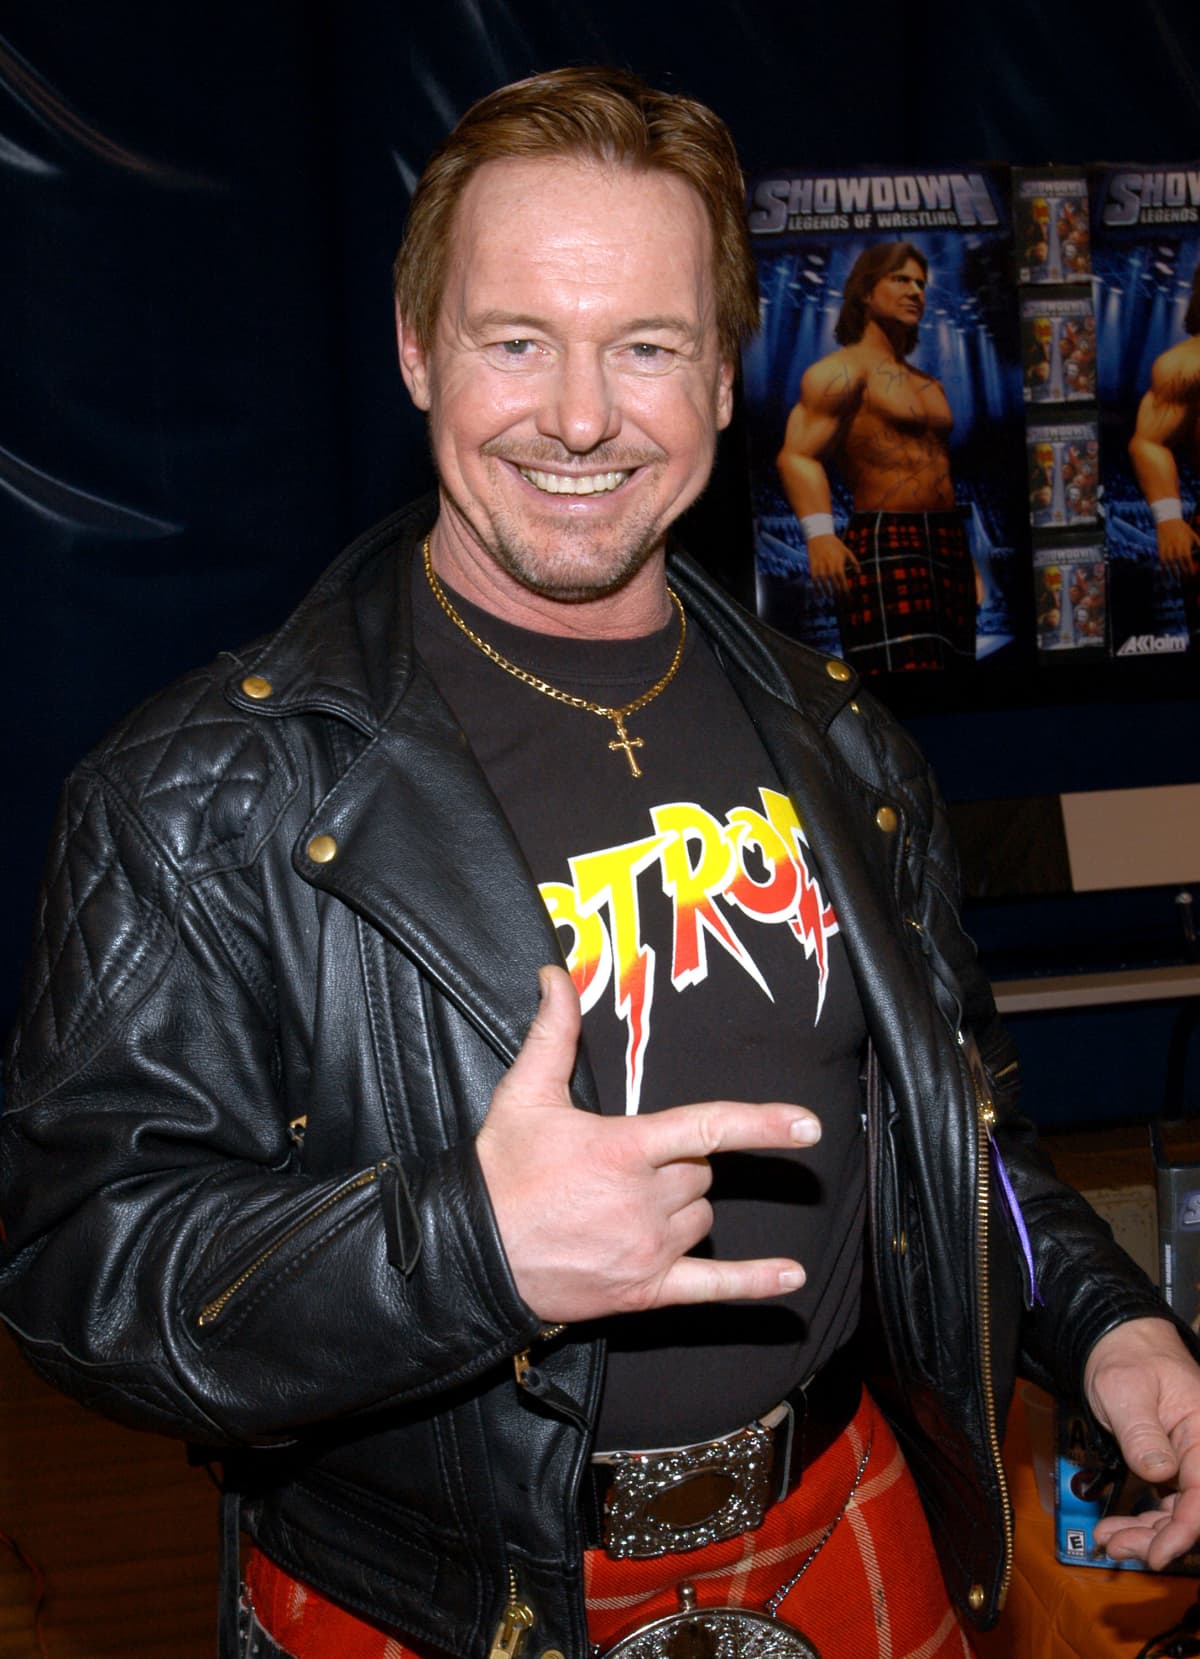 Professional Wrestler "Rowdy" Roddy Piper (Photo by Paul Andrew Hawthorne/WireImage)